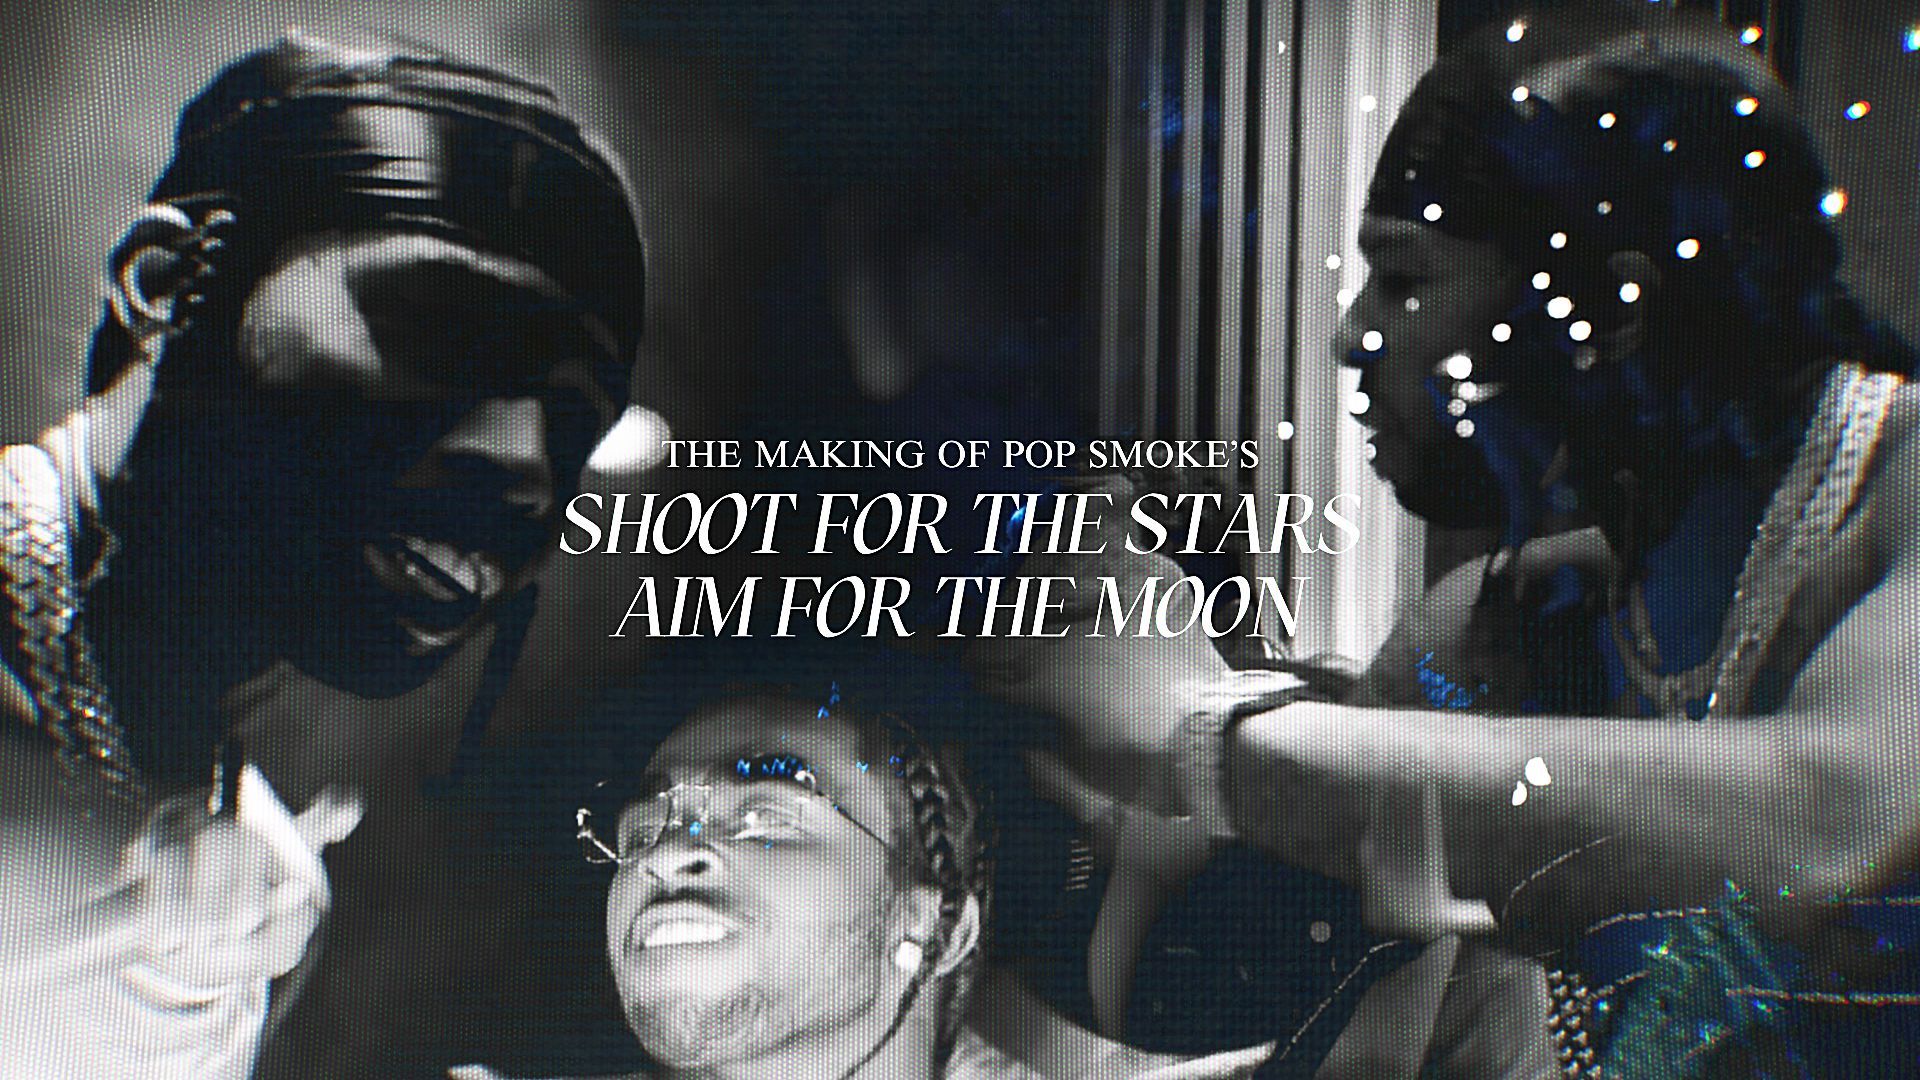 shoot for the stars aim for the moon